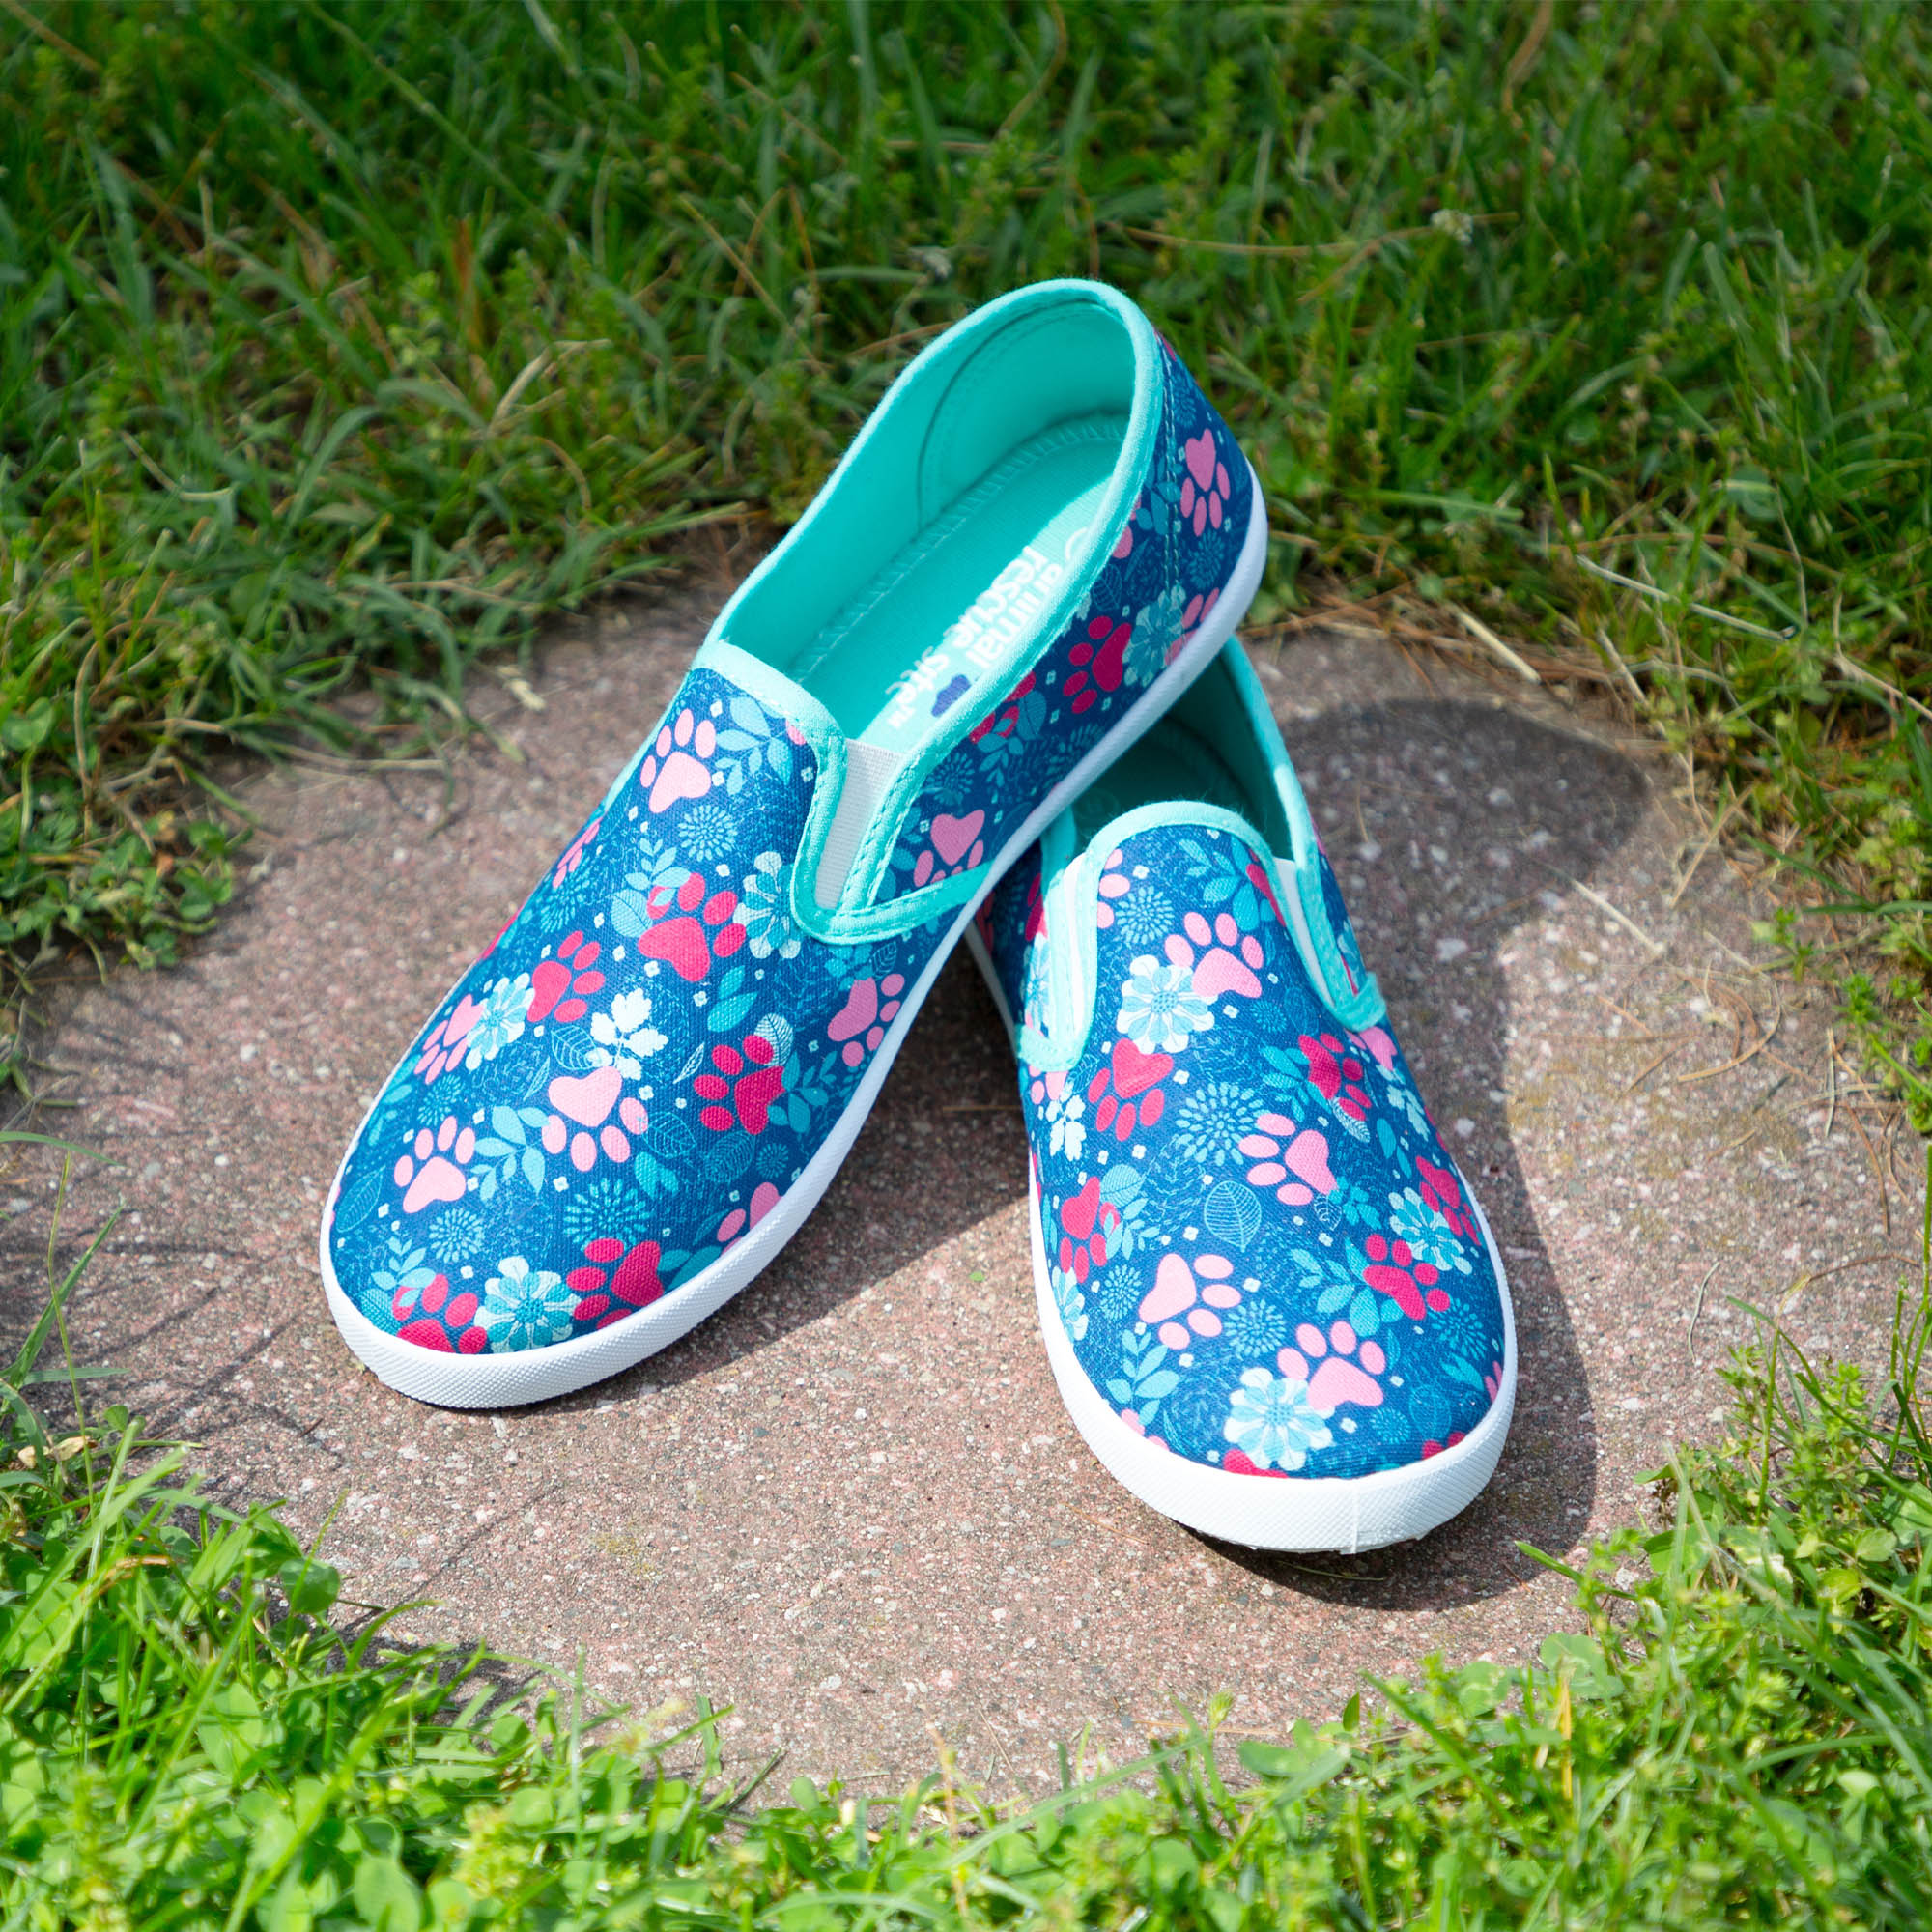 Women's Paw Print Slip On Canvas Shoes - Daisies & Paws - 10